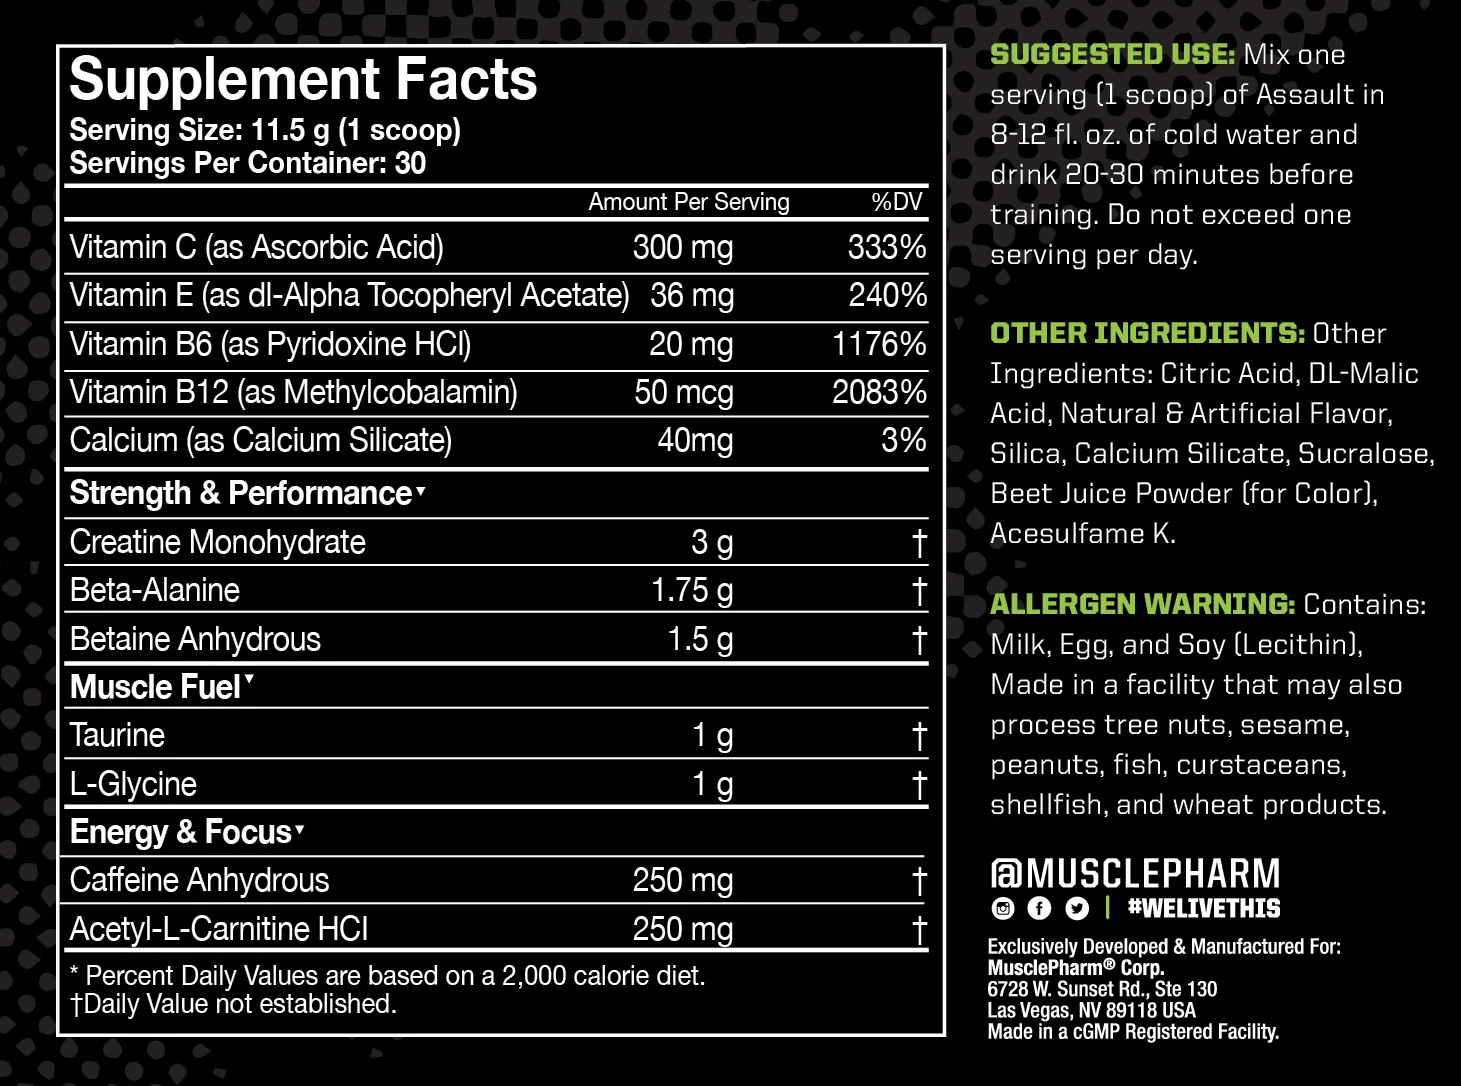 SUPPLEMENTS FACTS